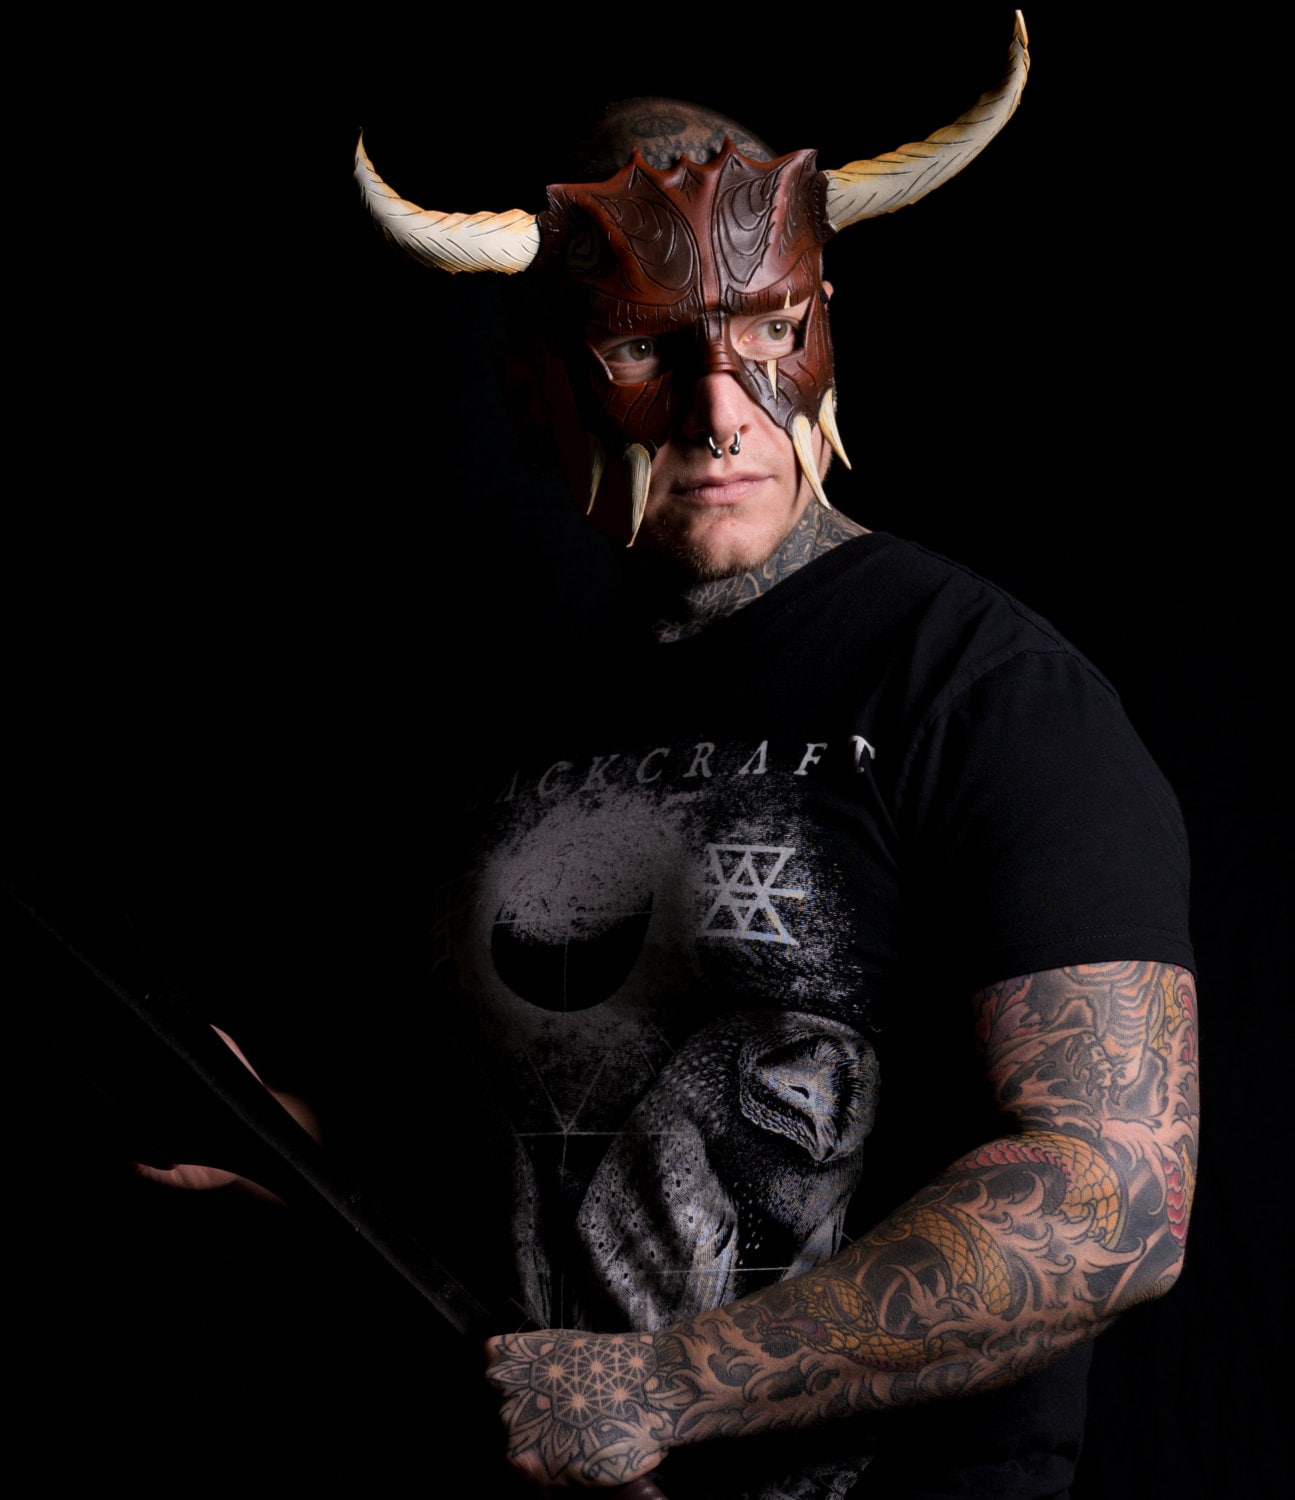 Handmade Genuine Leather Mask with Horns in Natural Colors - The Horned Beast